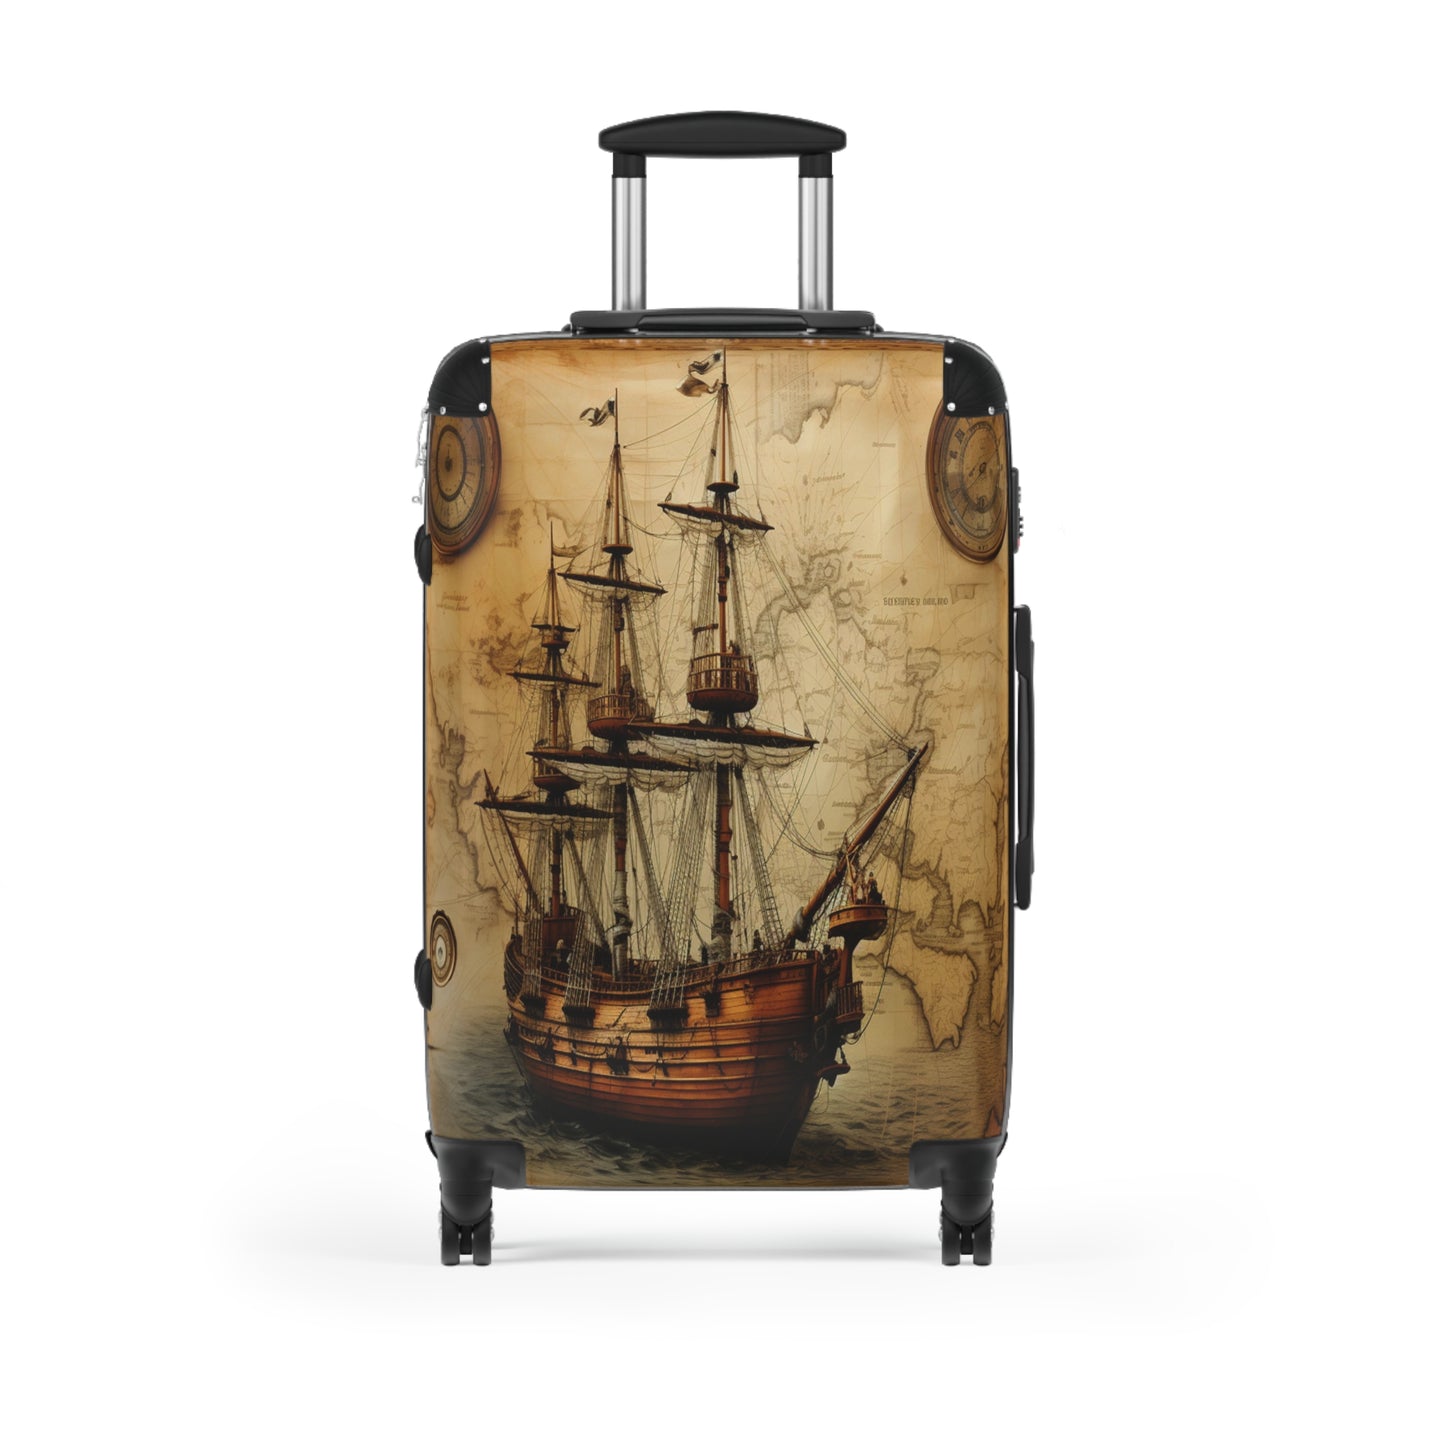 Antique Explorer Luggage | Explorer's Legacy Collection | Christmas vacation | Travel Luggage | Suitcase | Vintage Map